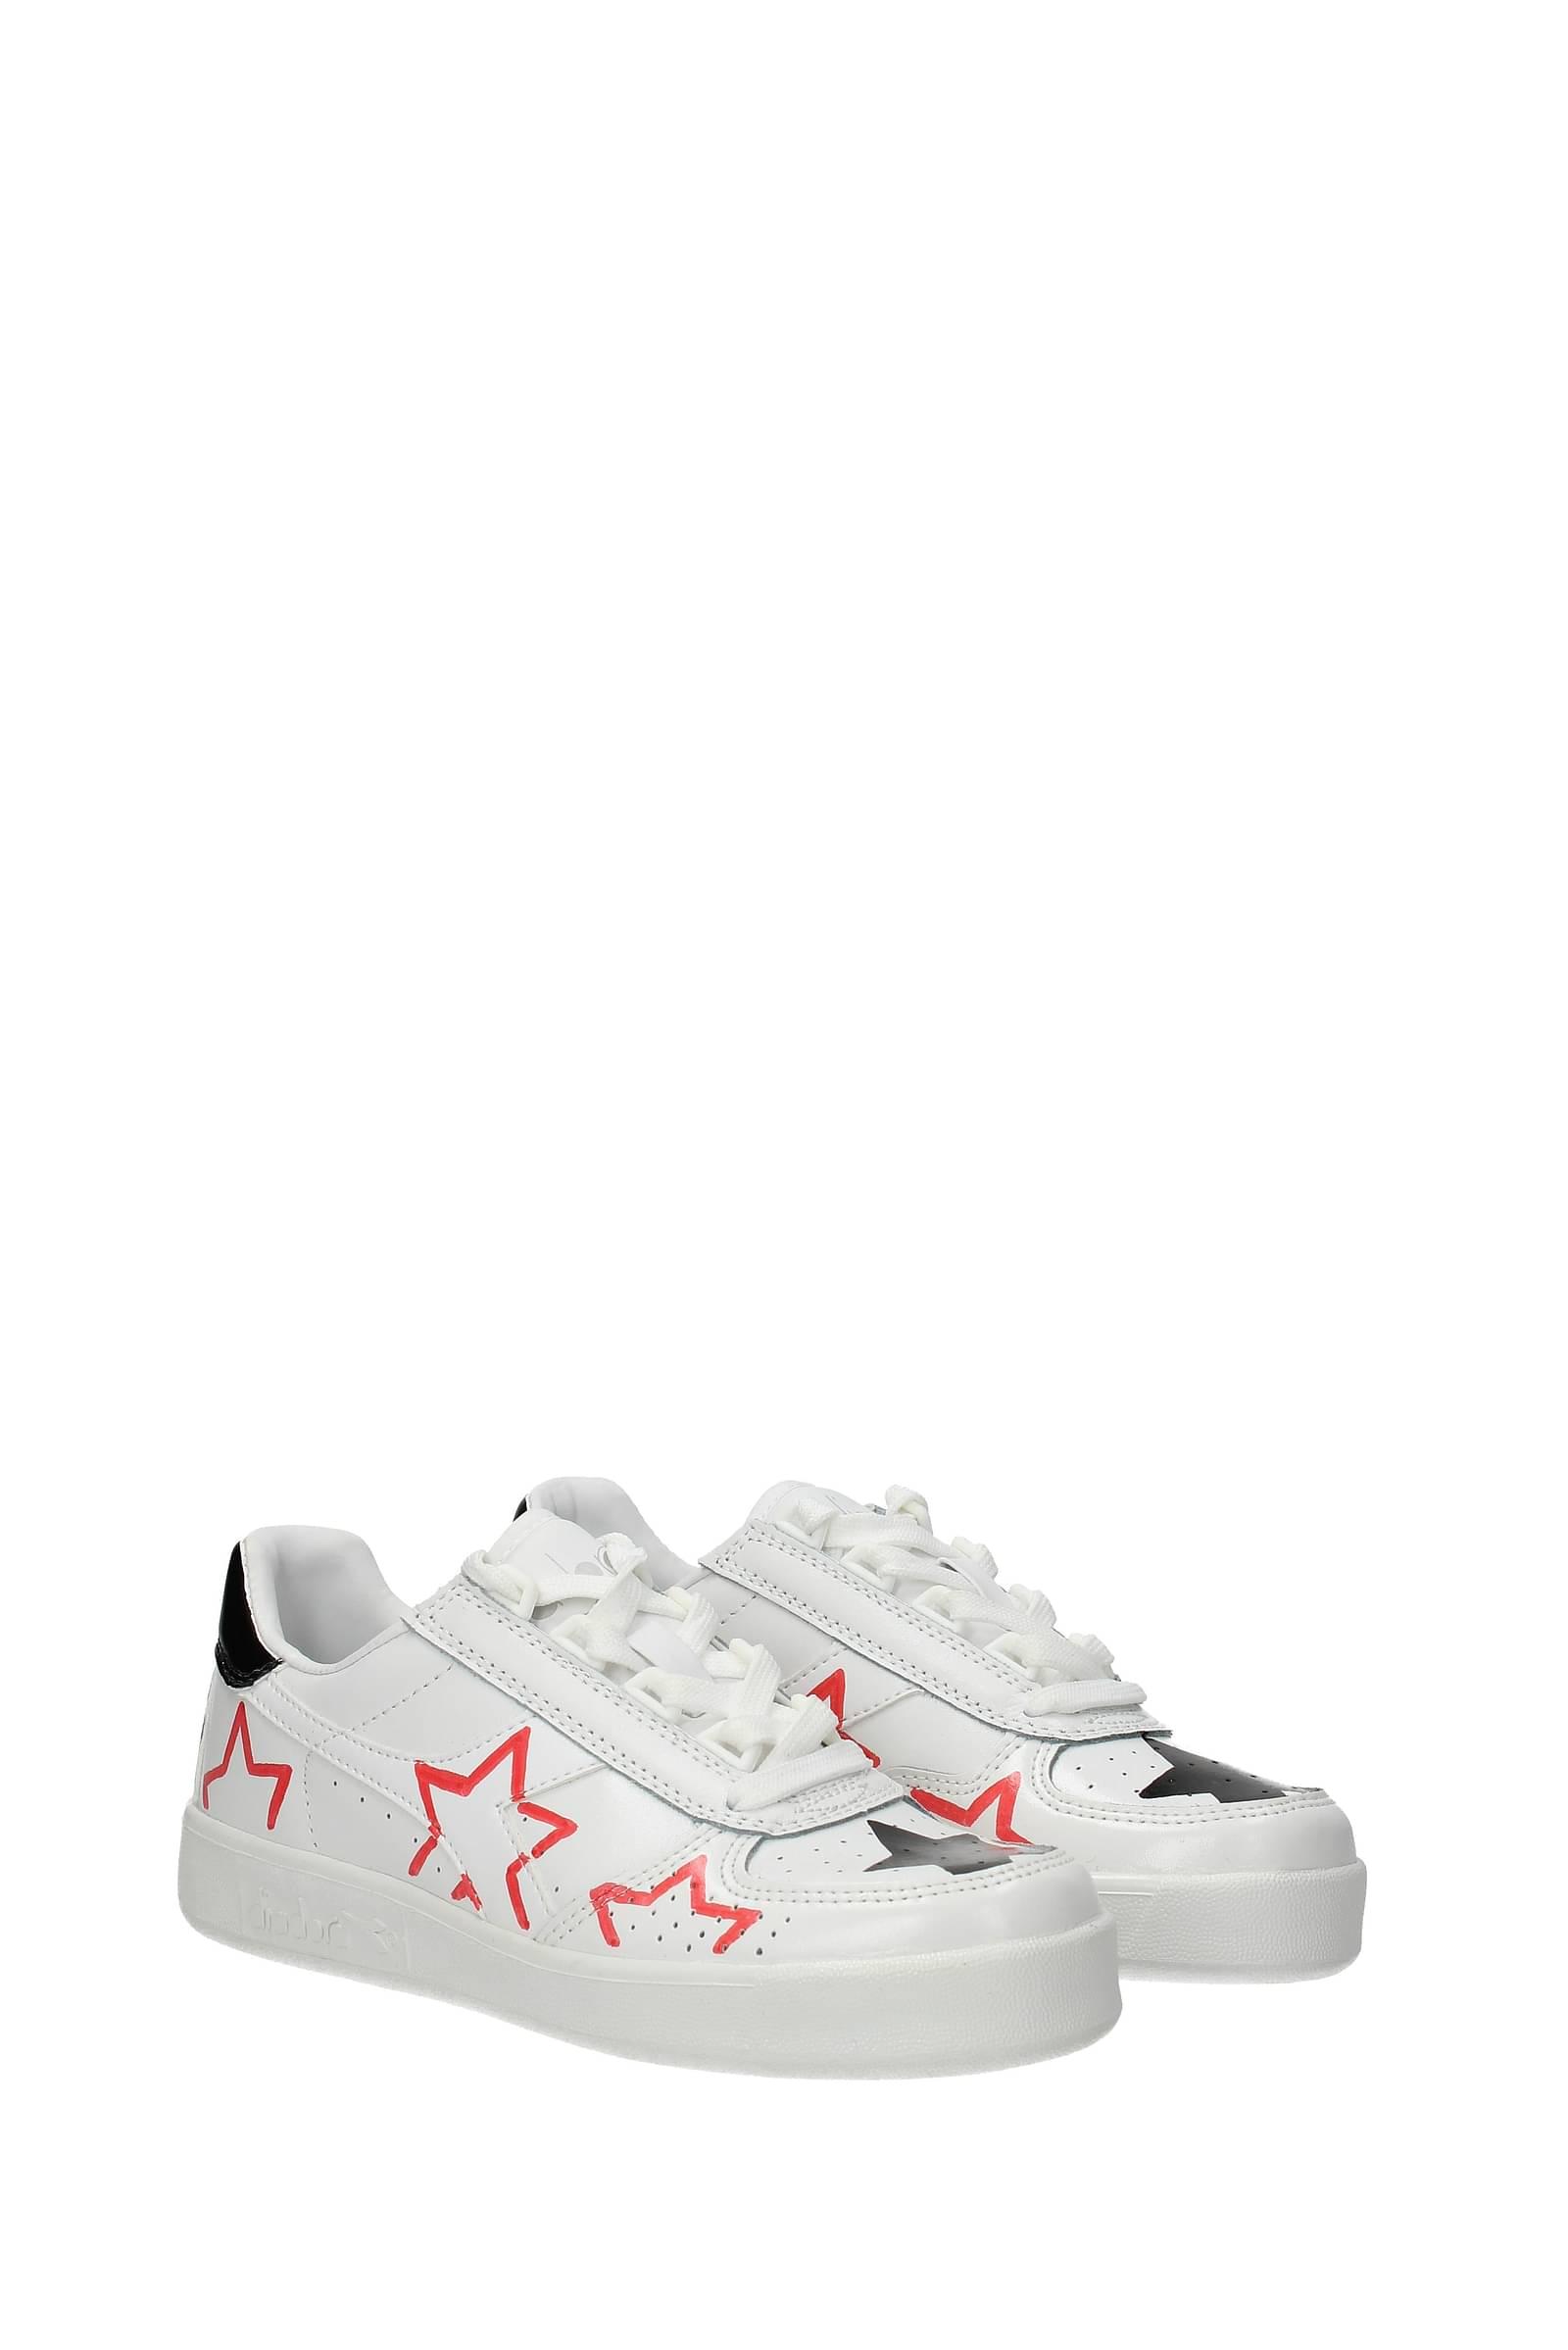 Diadora Sneakers The Editor B Elite Leather White Red | Lyst